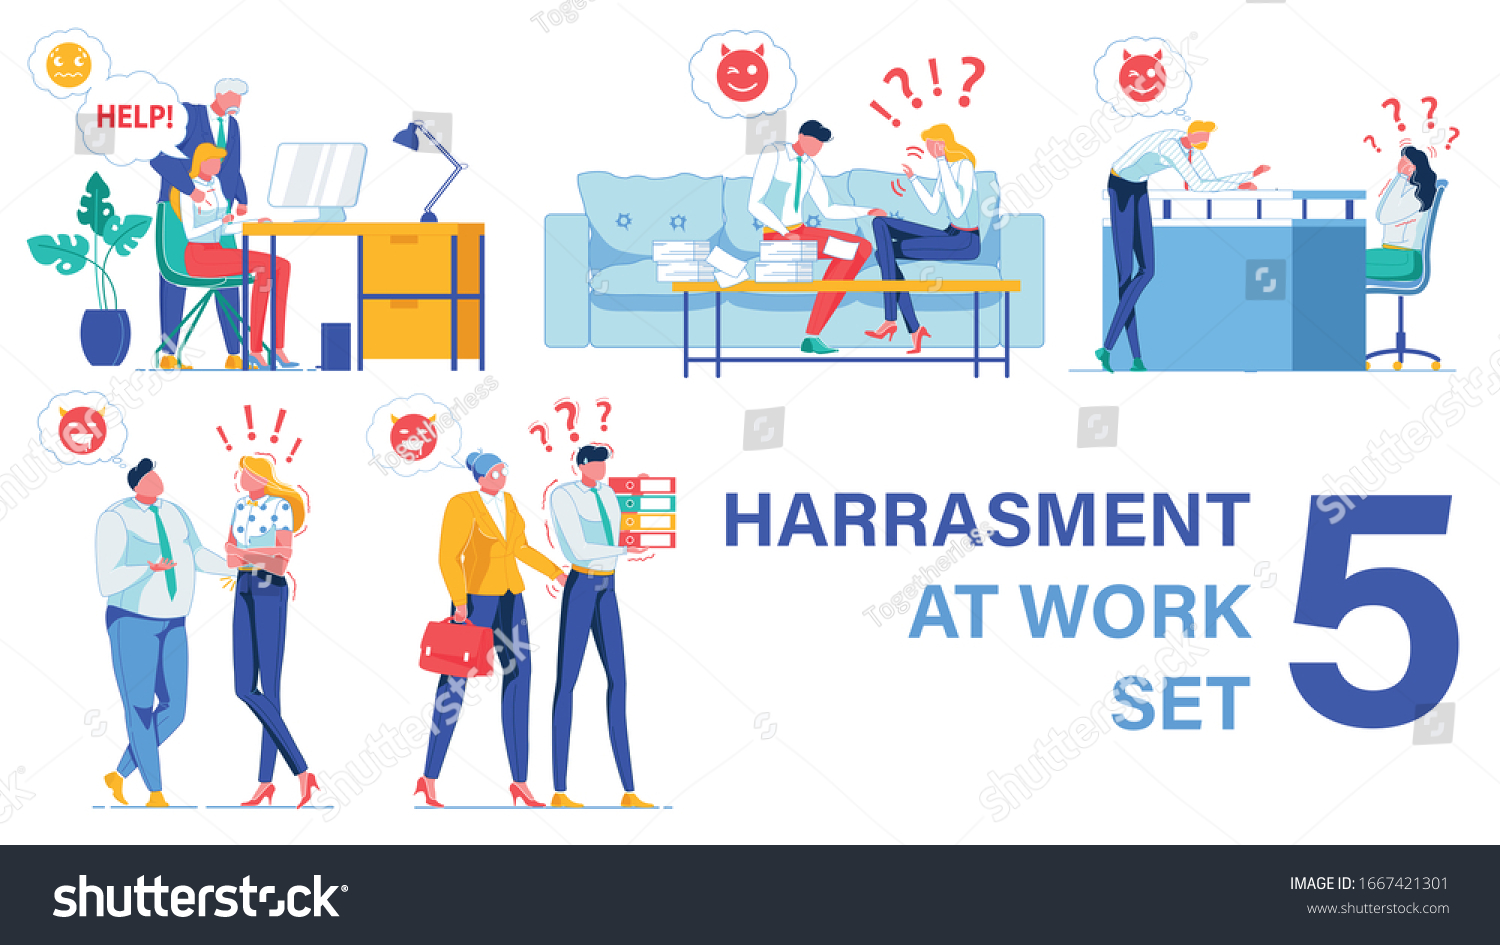 Workplace Harassment Types Five Pieces Vector Vector Có Sẵn Miễn Phí Bản Quyền 1667421301 